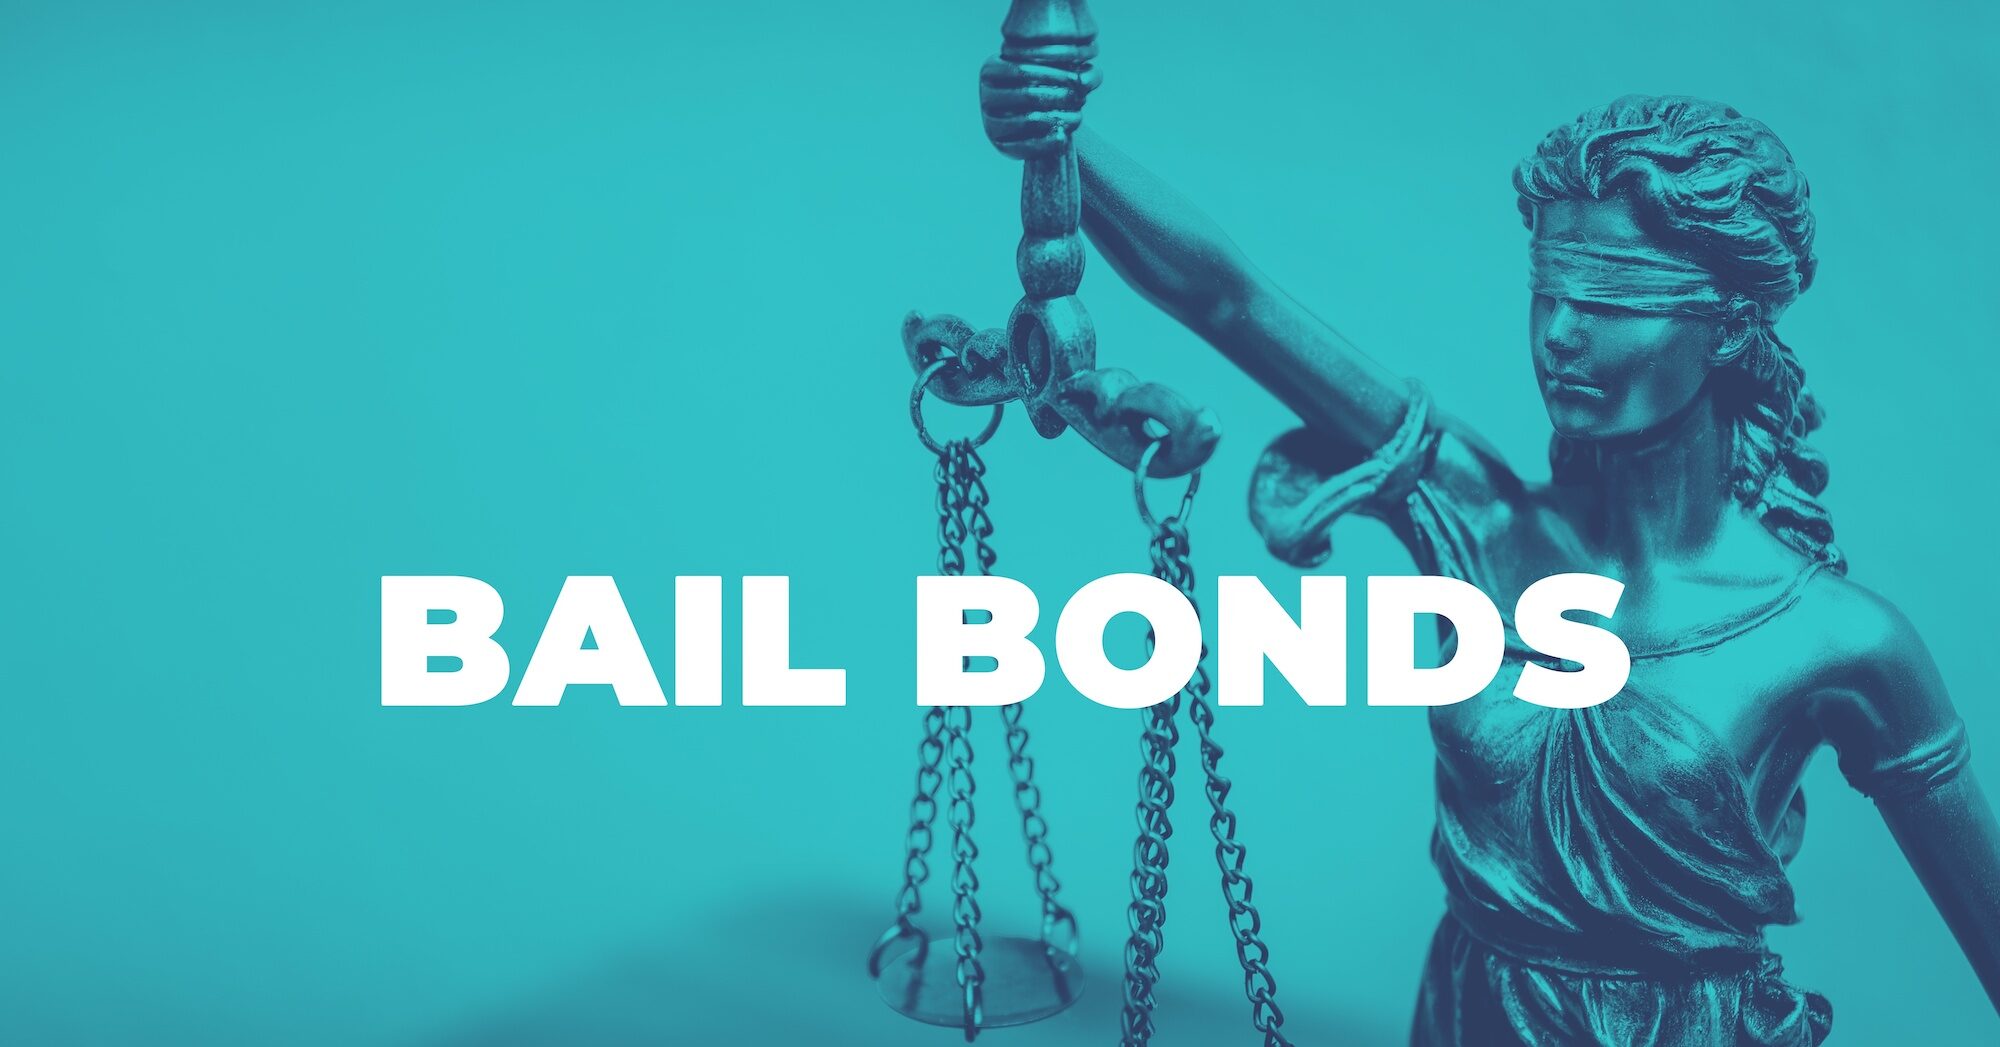 The phrase “bail bonds” is superimposed over a blue background with the image of Lady Justice.